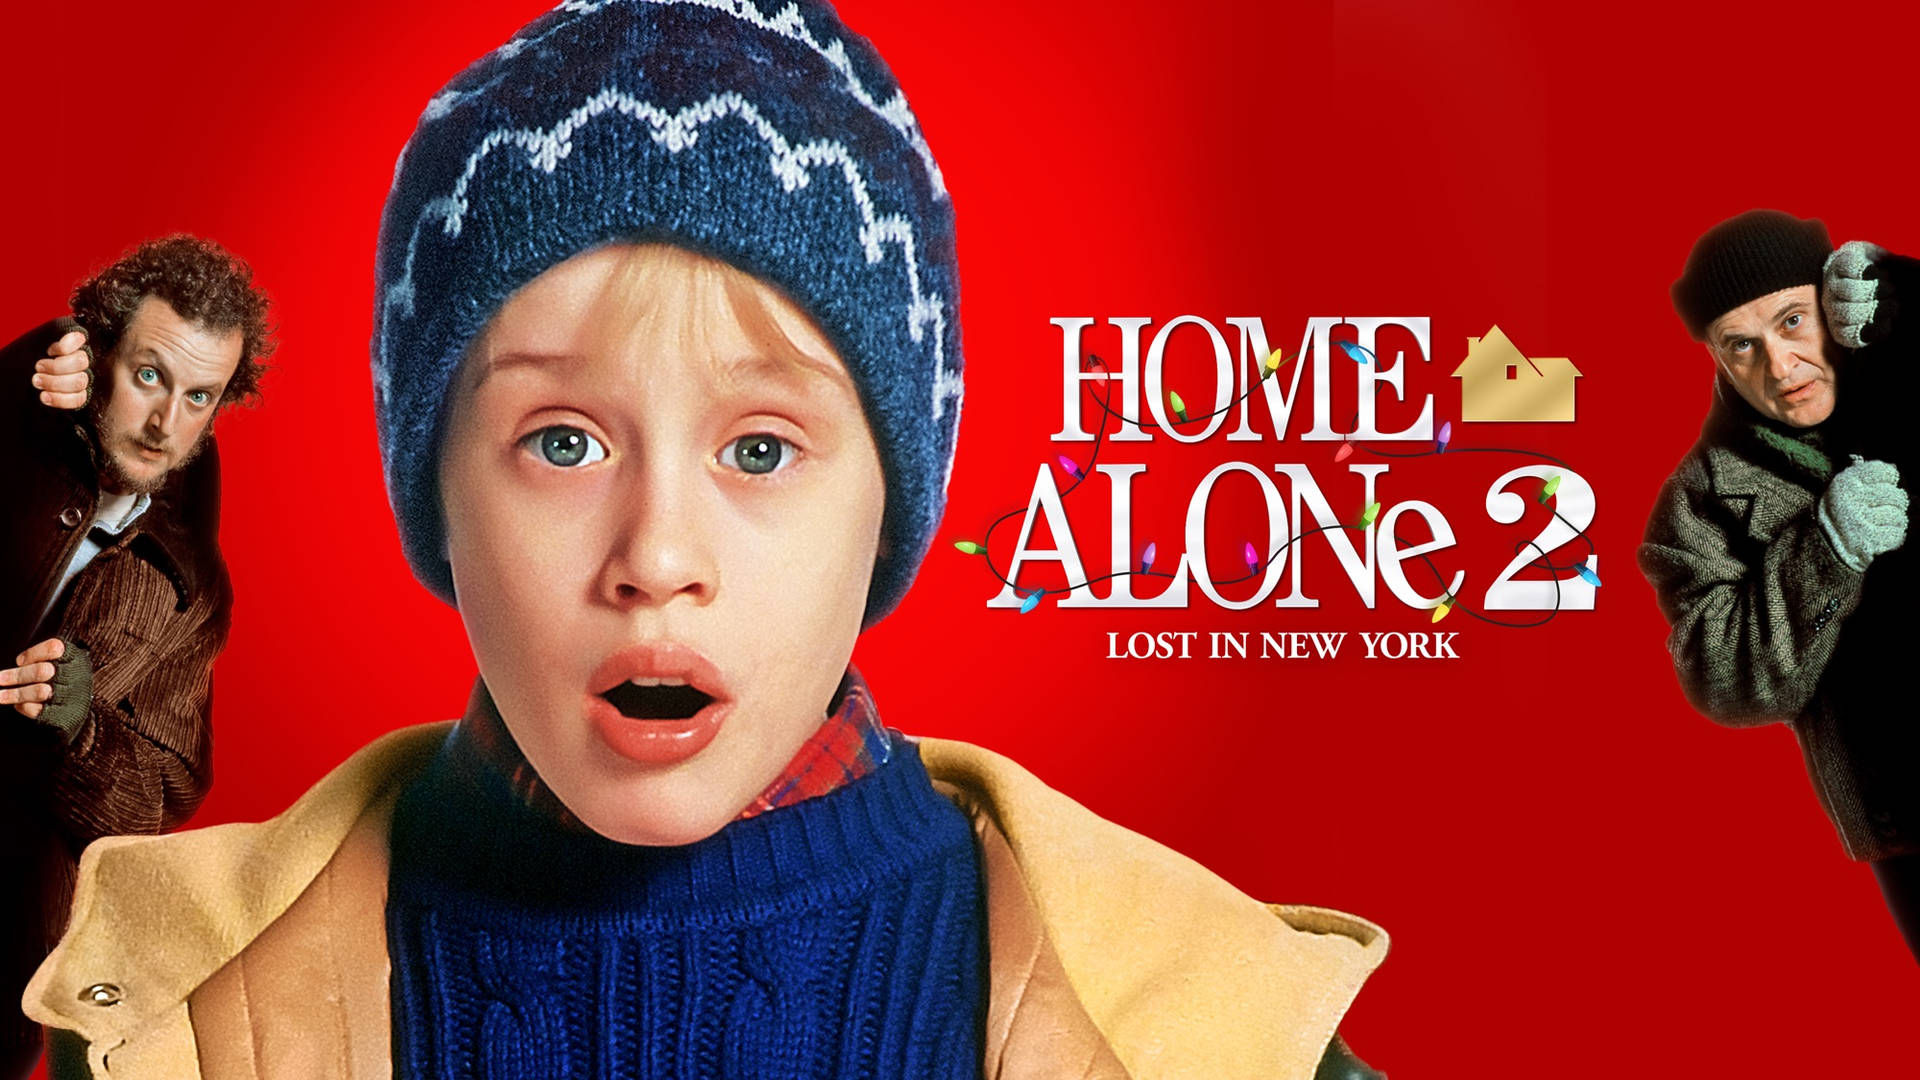 Home Alone 2 Promotional Poster